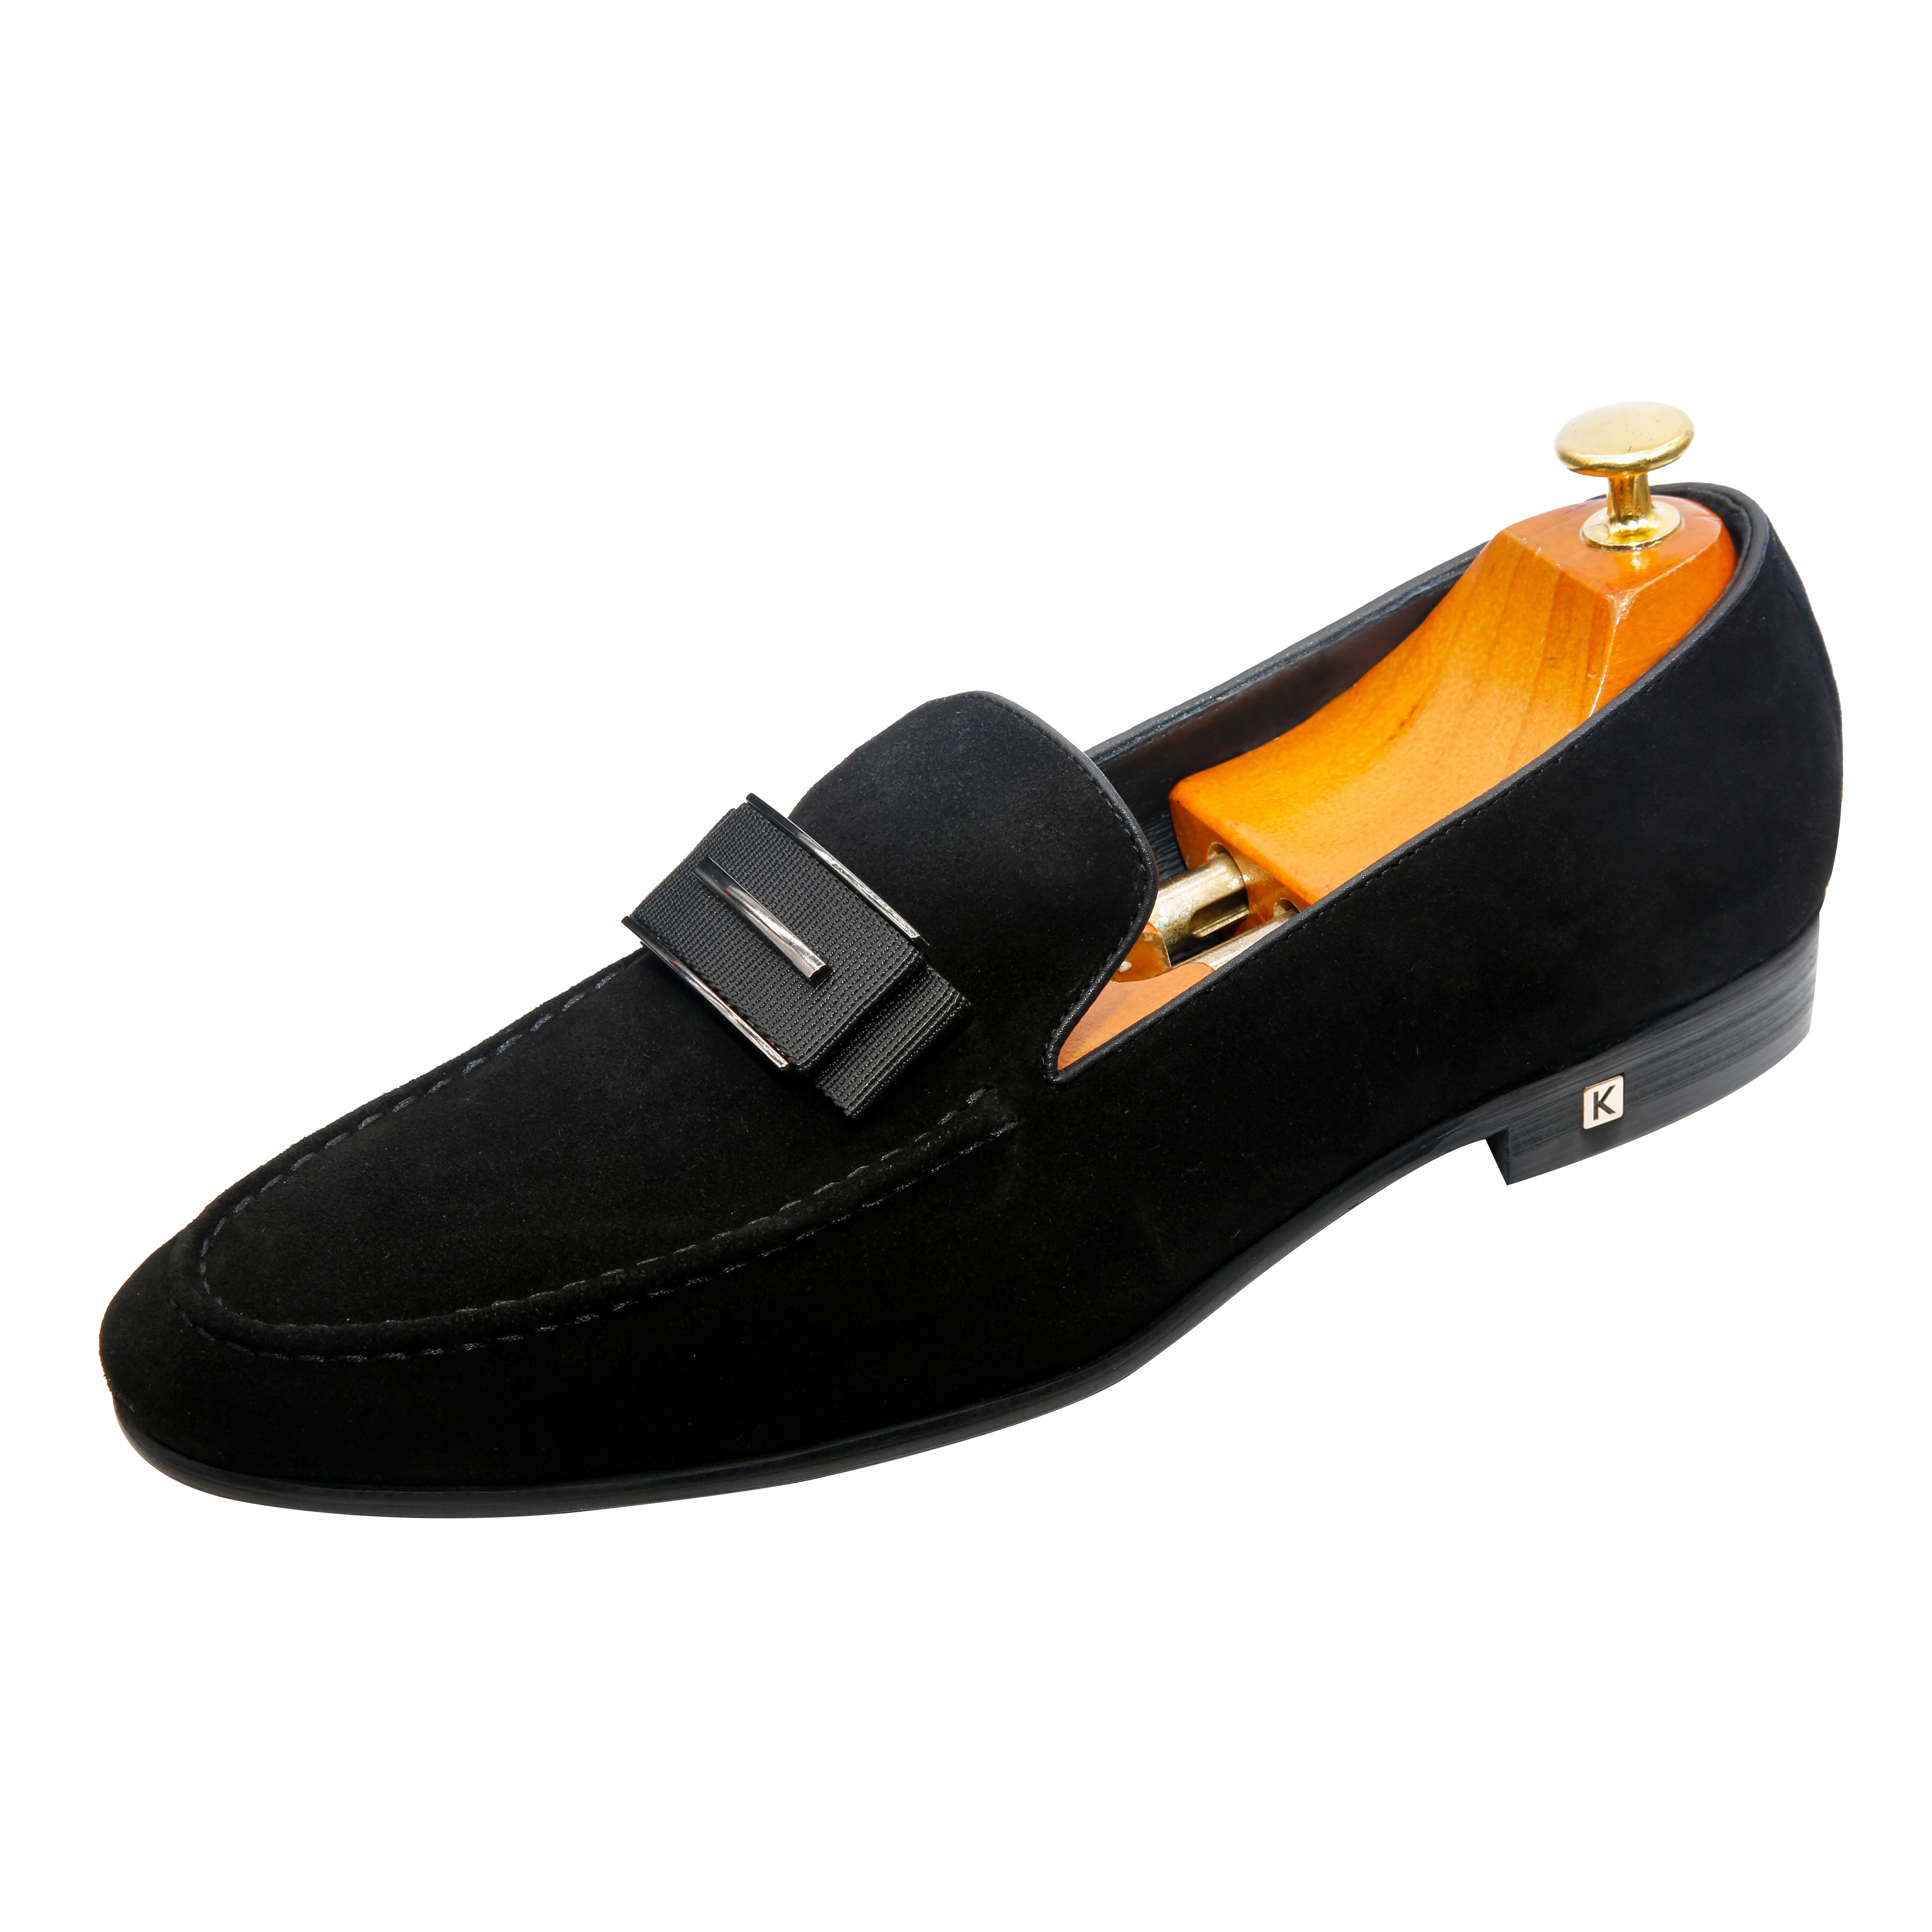 Handmade Real Leather Loafer Shoes For Men 